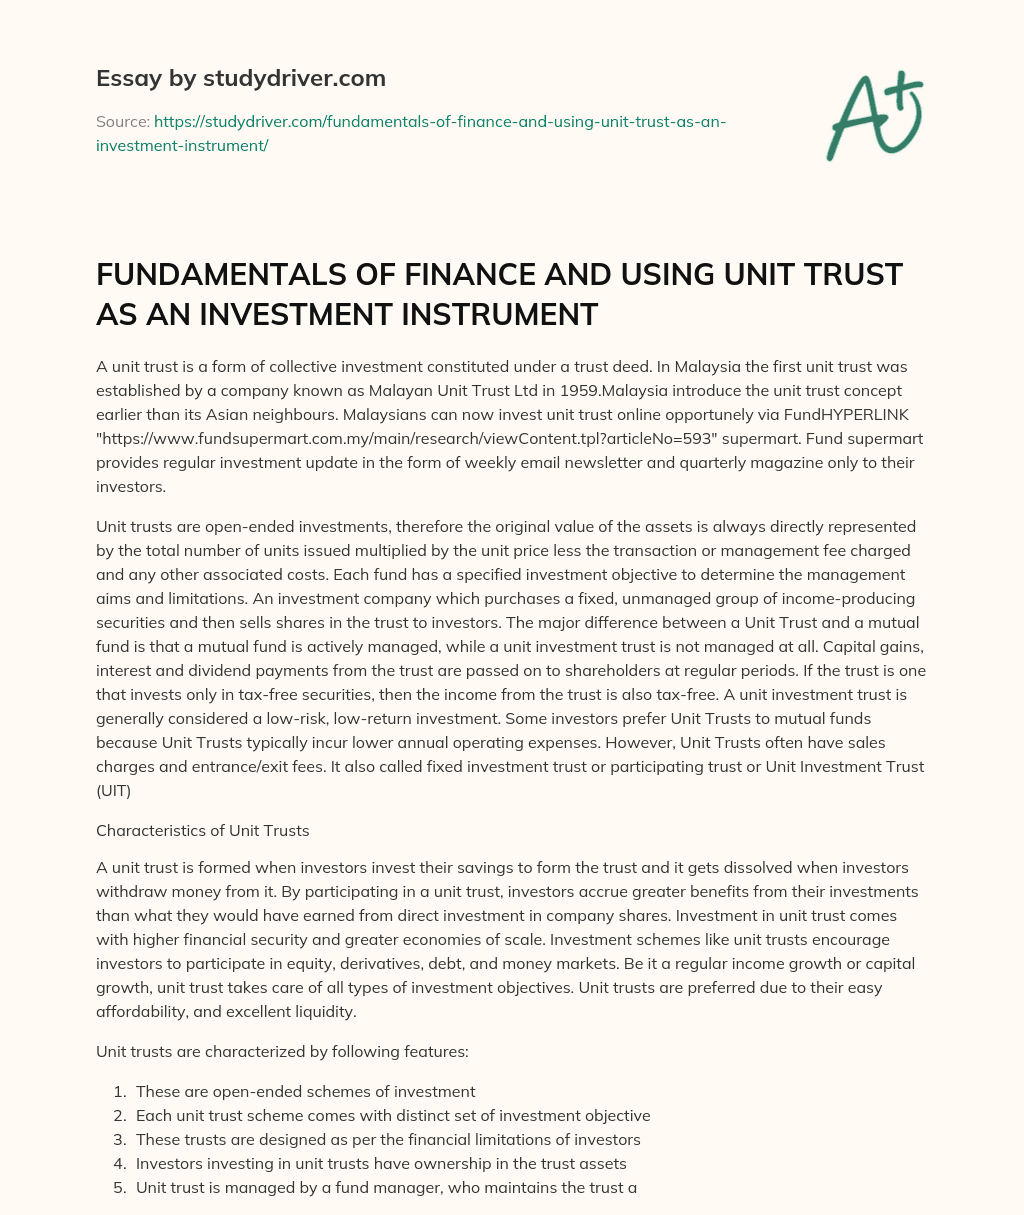 FUNDAMENTALS of FINANCE and USING UNIT TRUST as an INVESTMENT INSTRUMENT essay